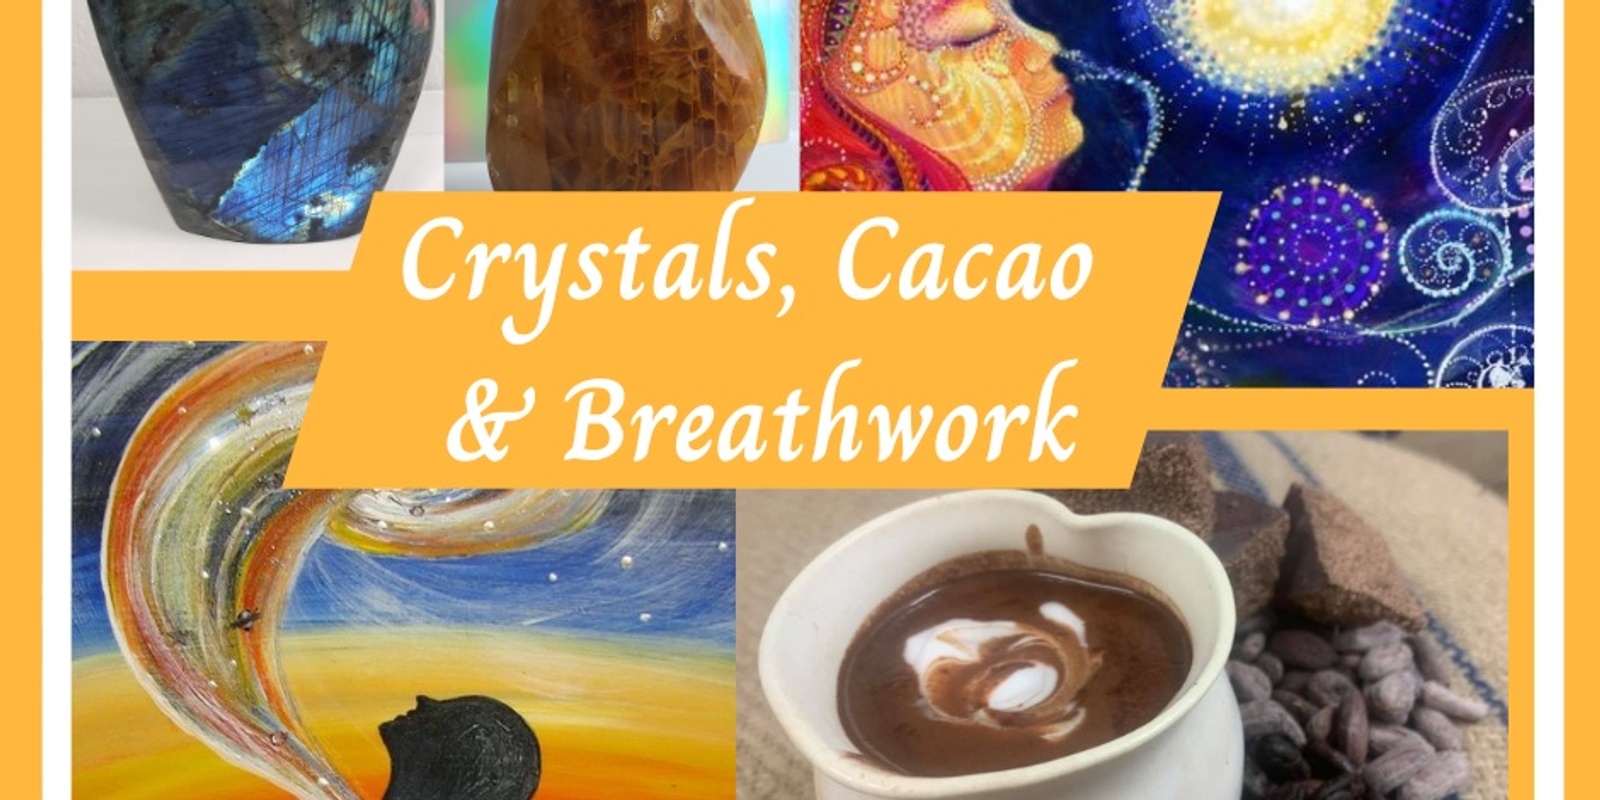 Banner image for Crystals, Cacao & Breathwork at Tai Tapu